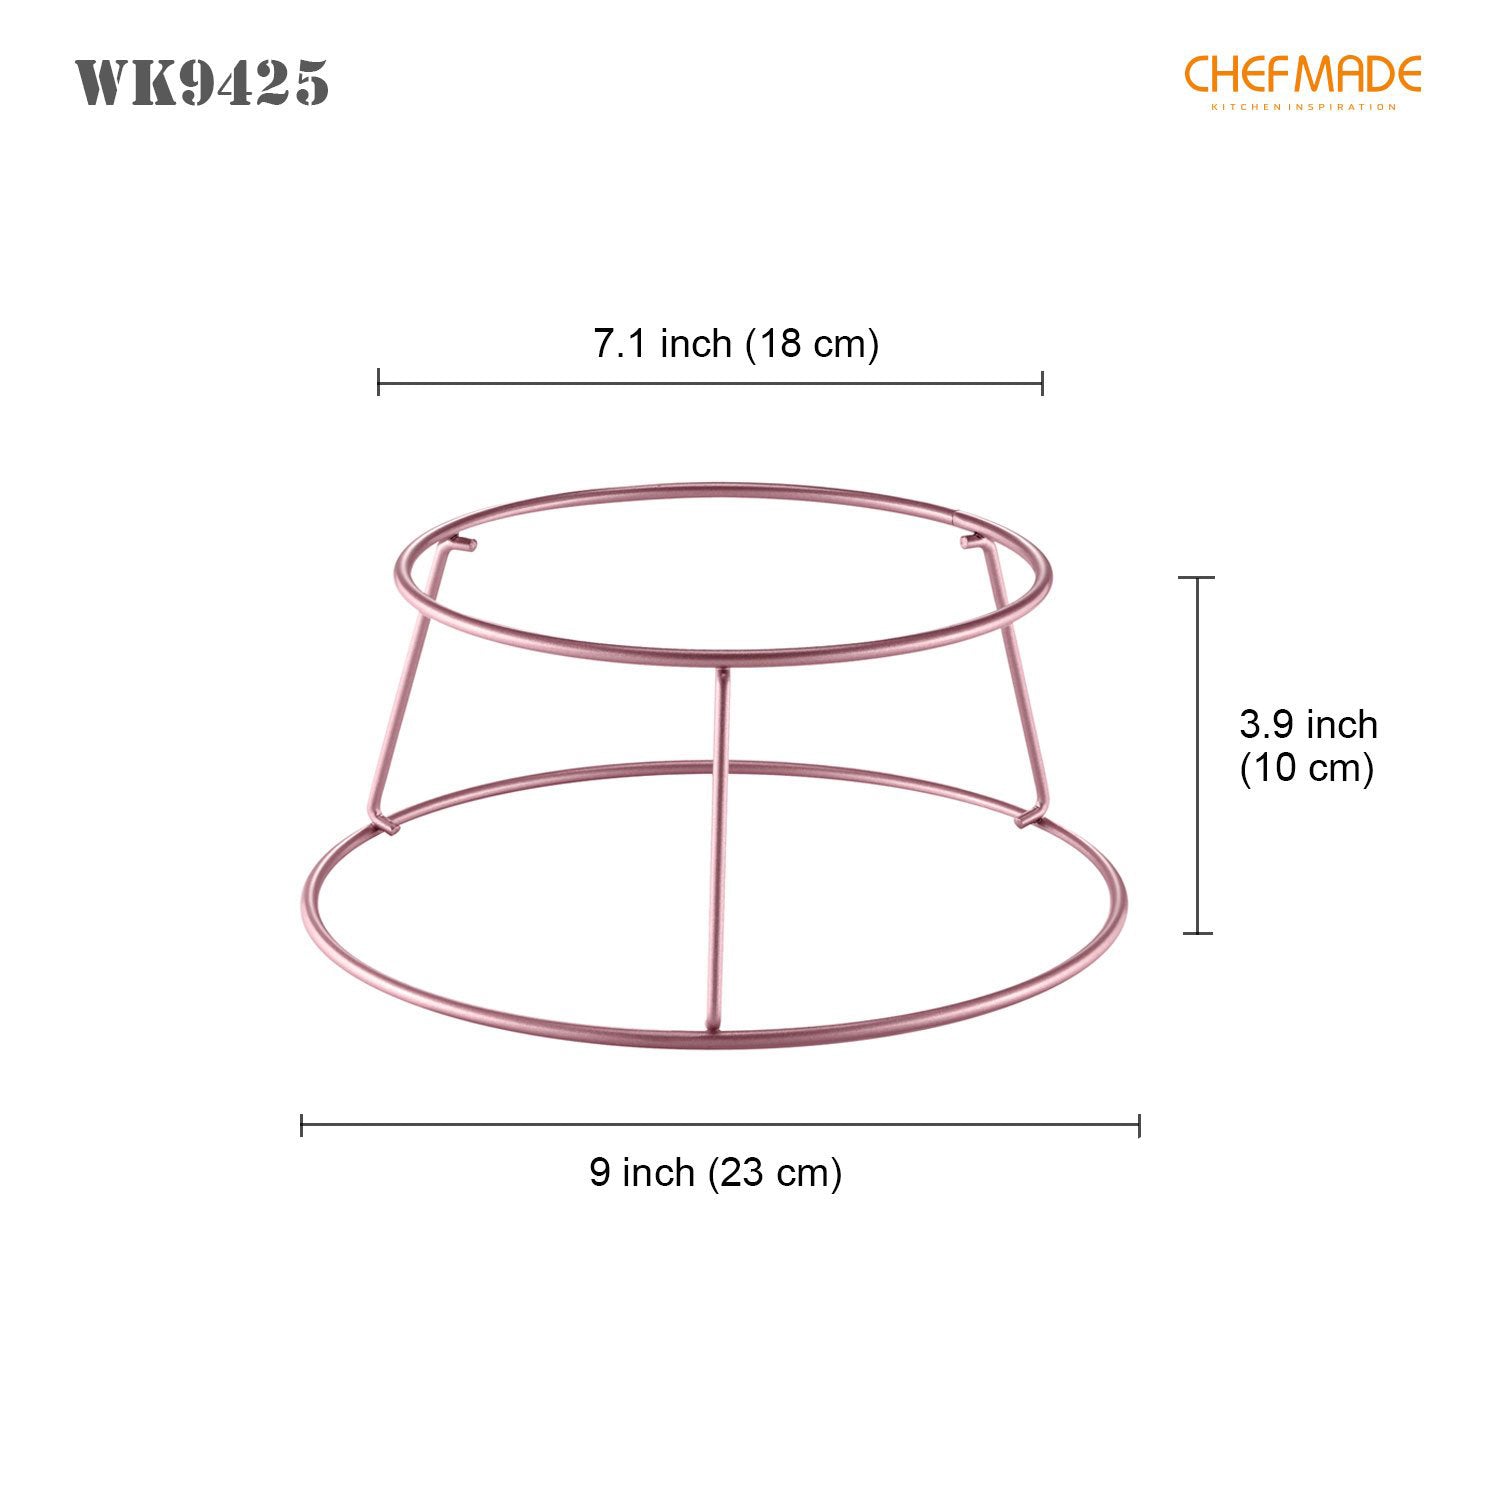 CHEFMADE Non-Stick Cooling Rack (WK9425)